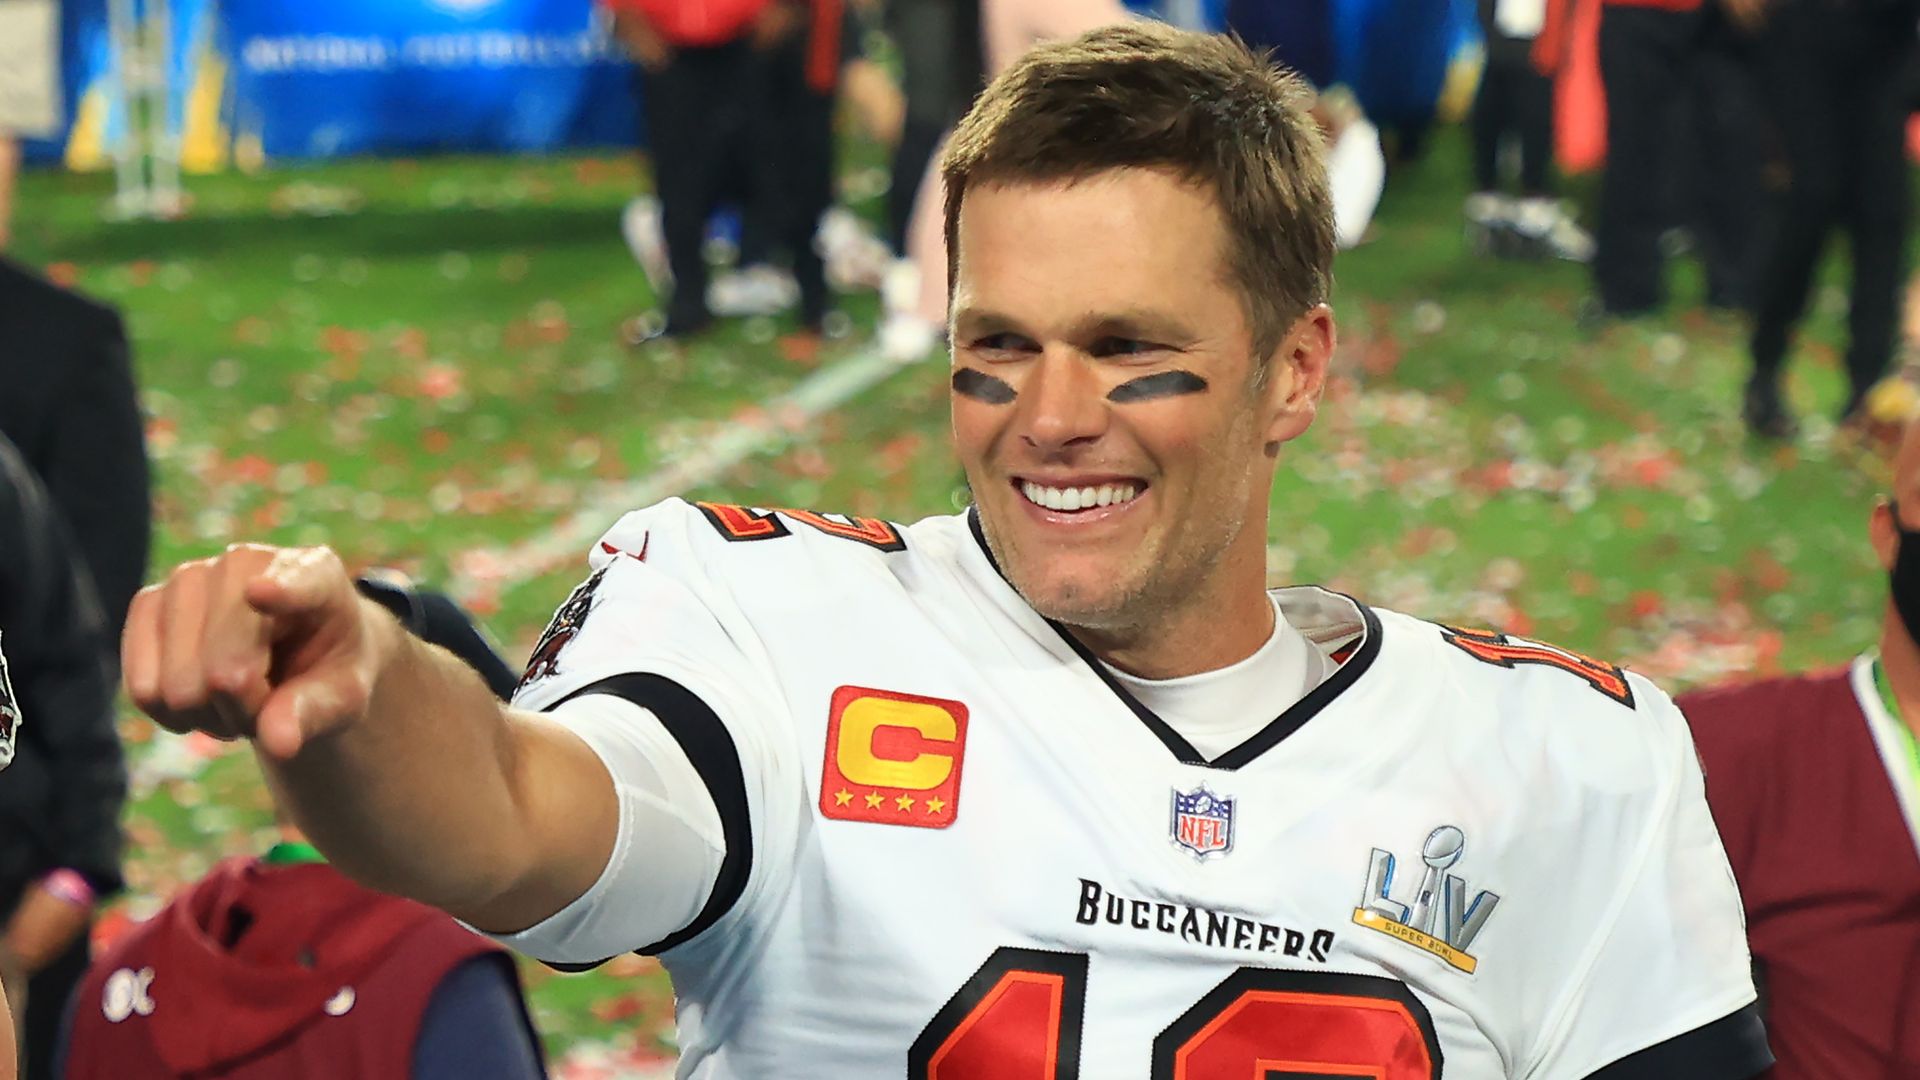  Tom Brady #12 of the Tampa Bay Buccaneers celebrates after defeating the Kansas City Chiefs in Super Bowl LV 